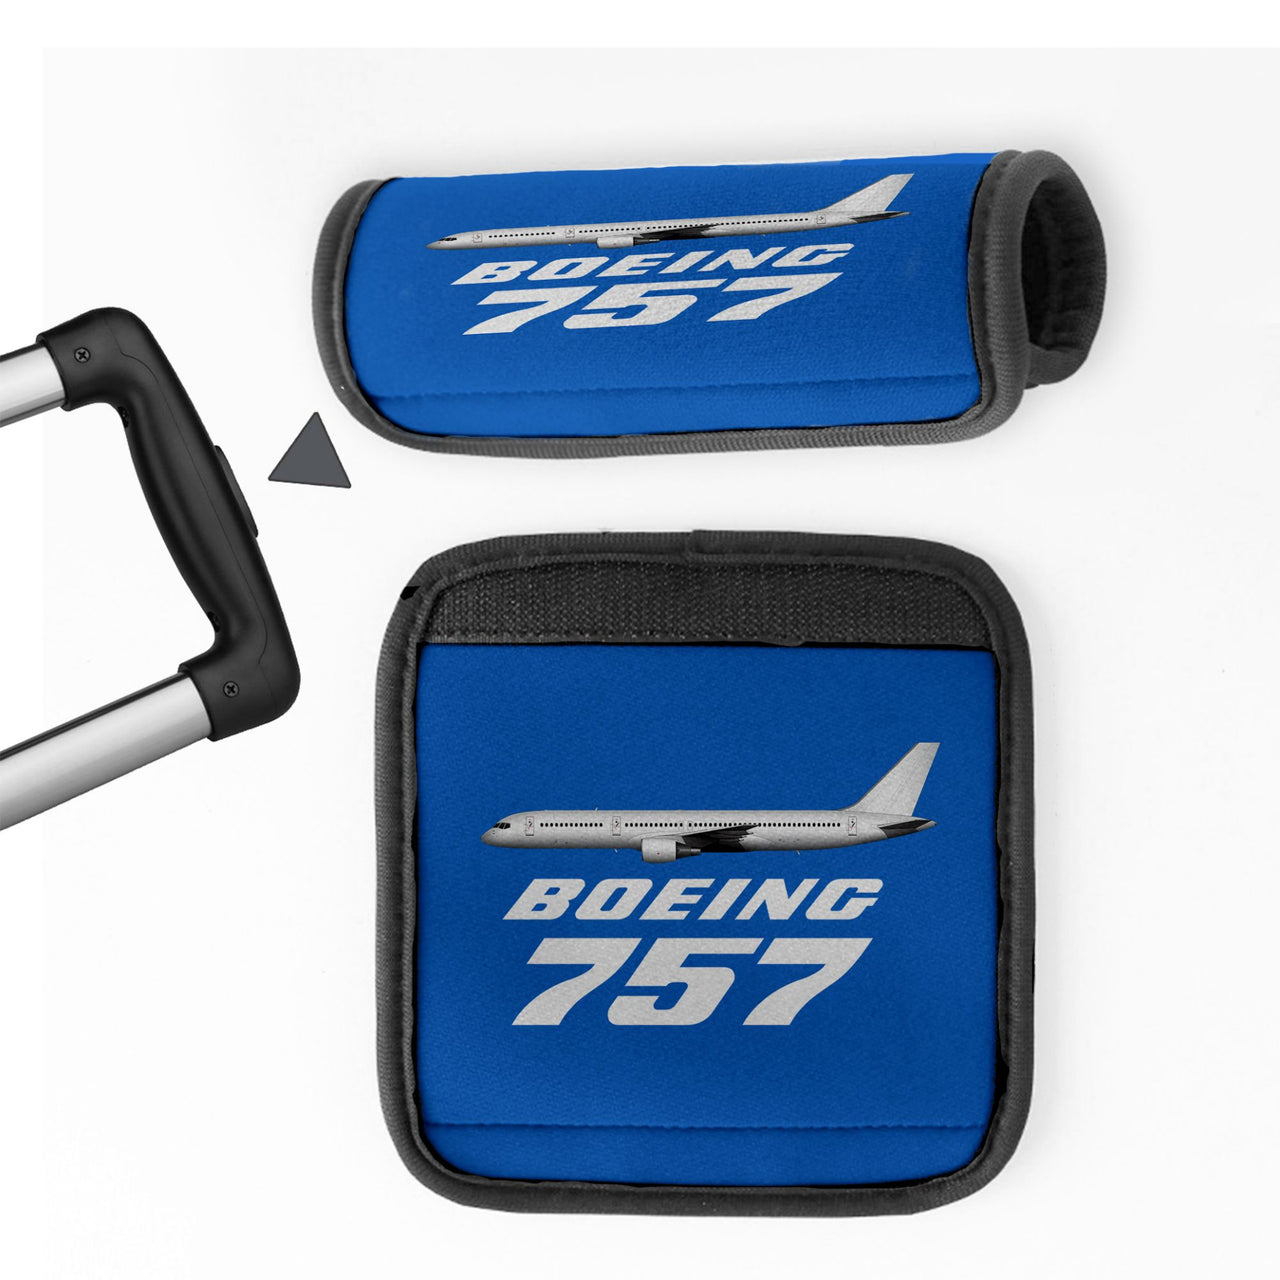 The Boeing 757 Designed Neoprene Luggage Handle Covers